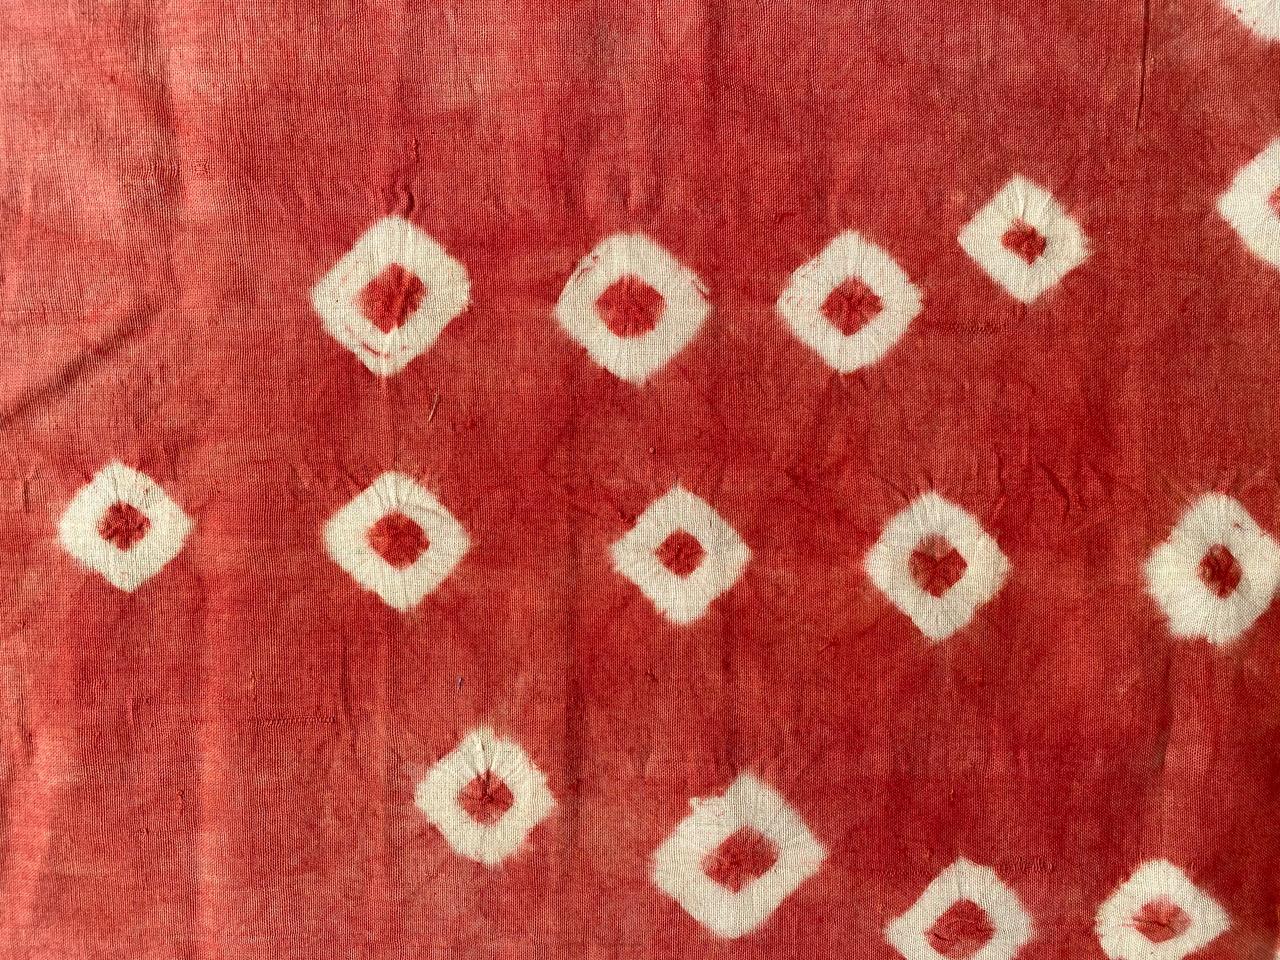 Indonesian Andrianna Shamaris Linen and Cotton Antique Textile from Toraja Land For Sale